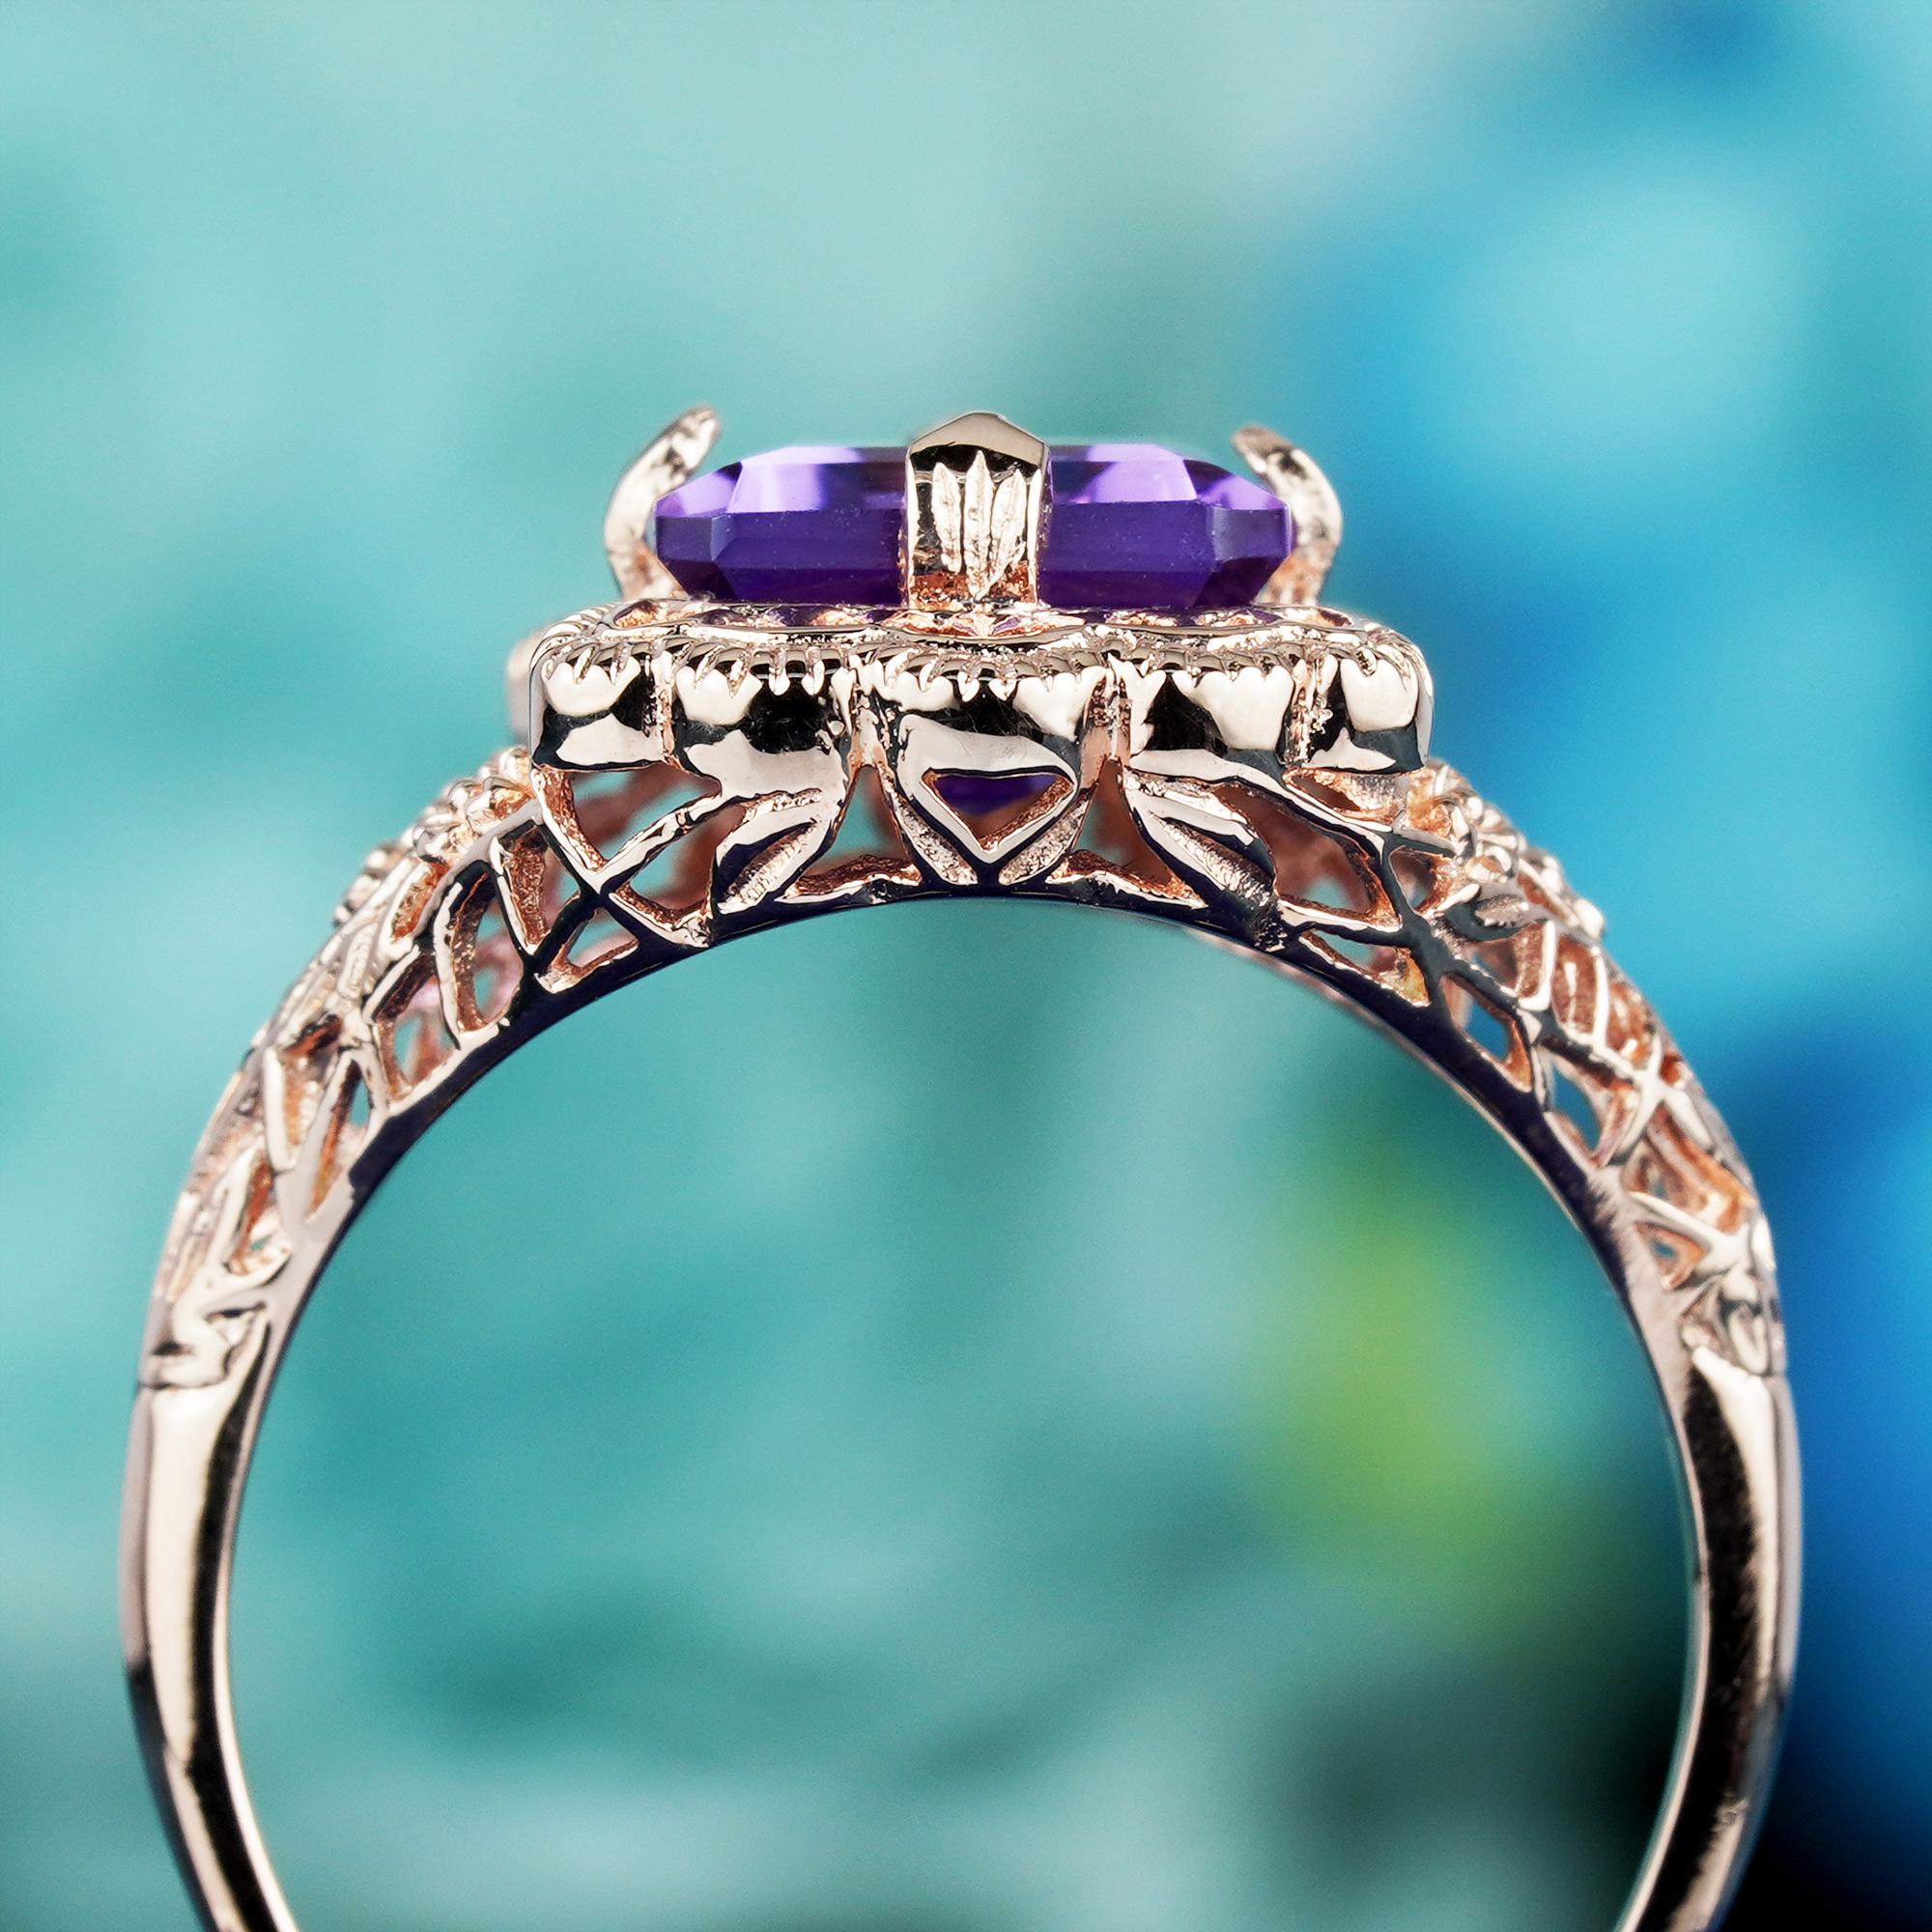 For Sale:  3.5 Ct. Amethyst Vintage Style Filigree Cocktail Ring in Solid 9K Rose Gold 5